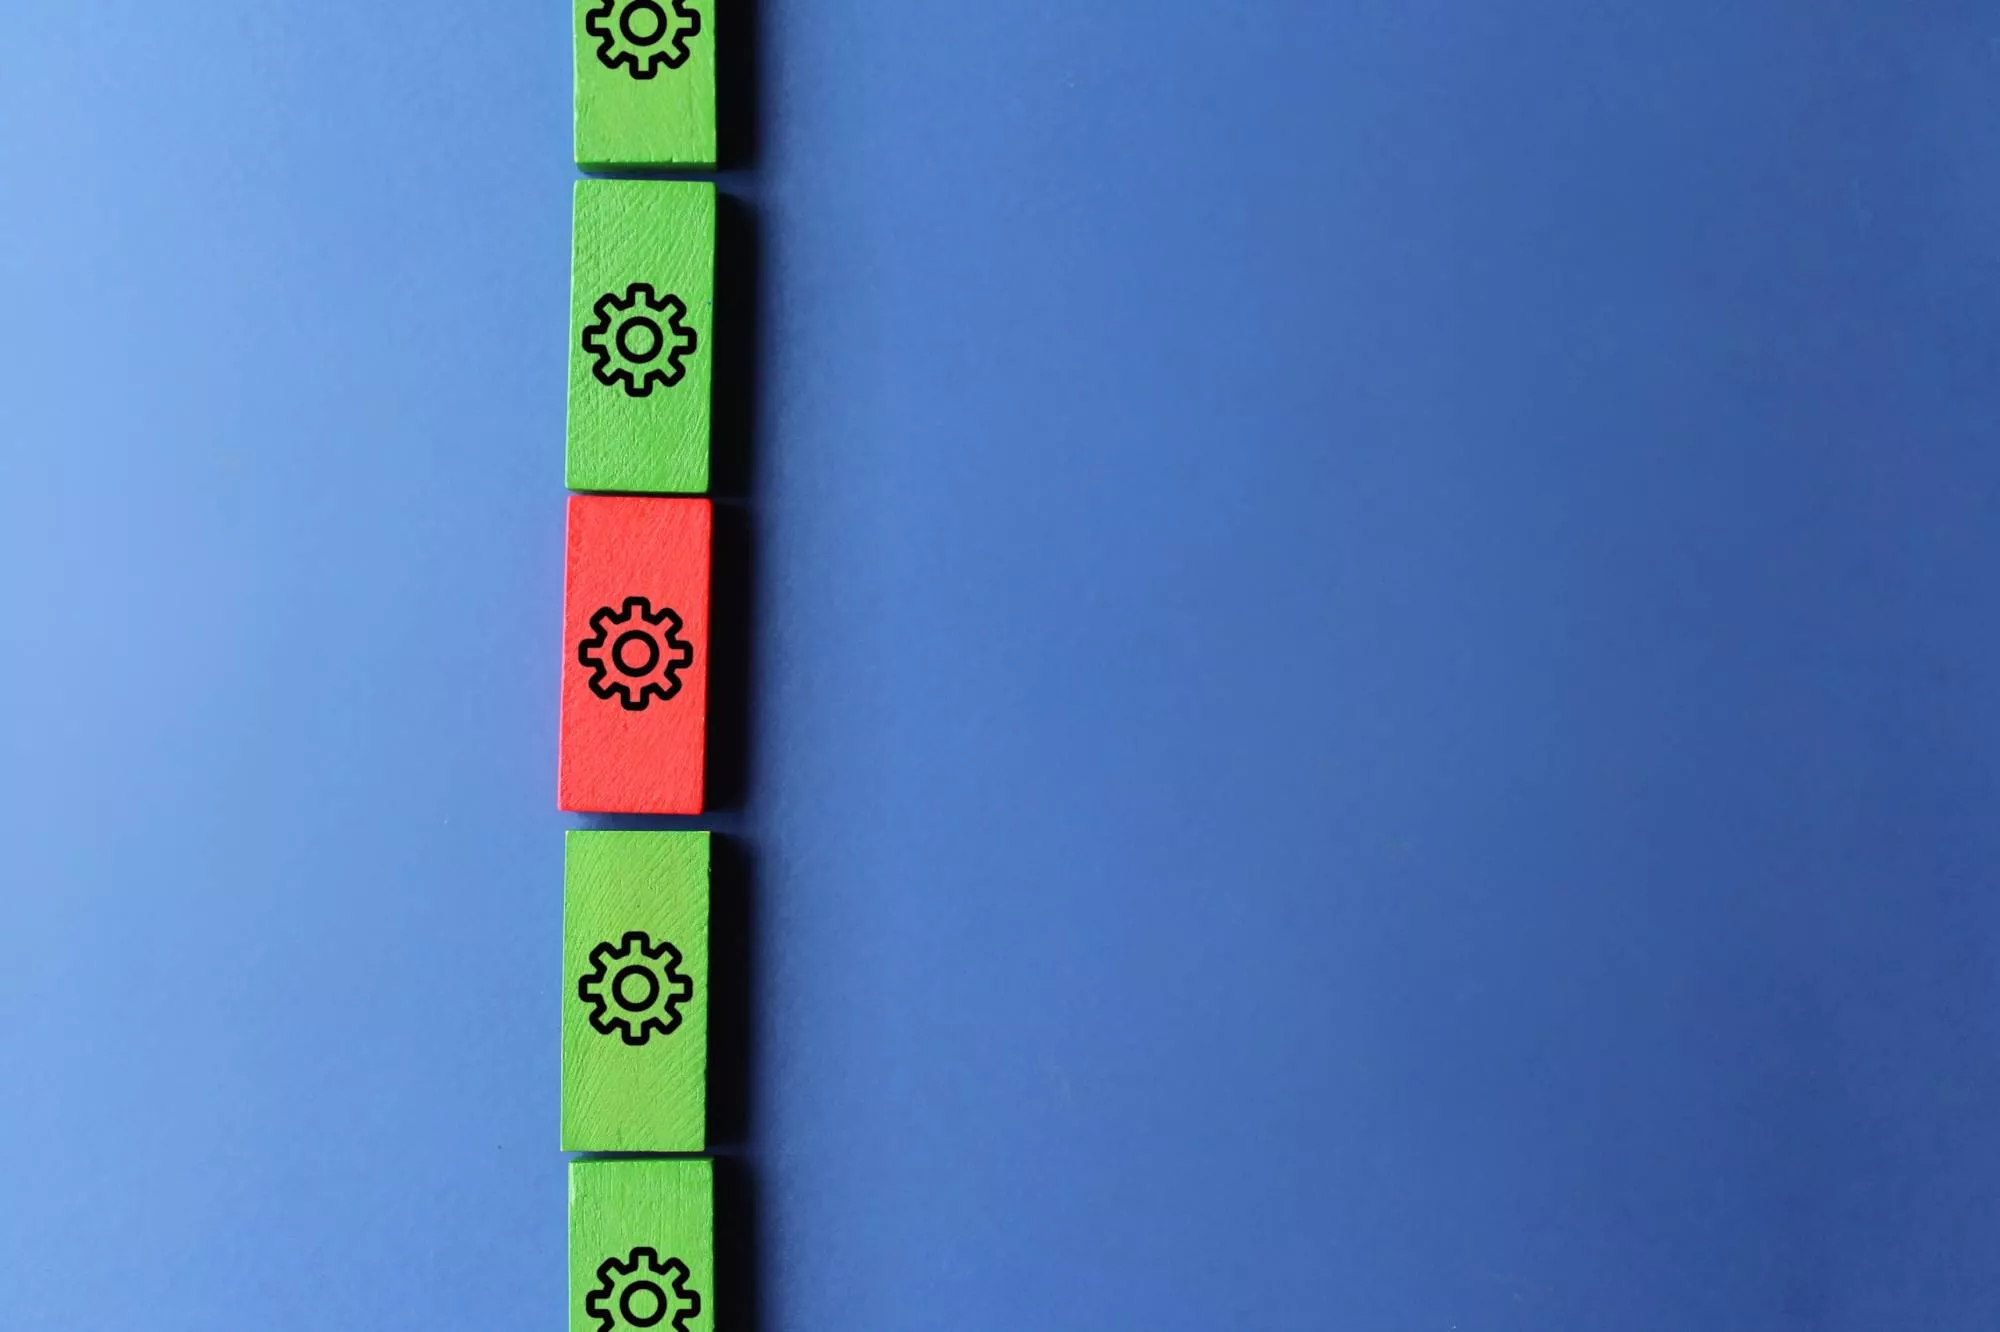 A red wooden block gear in the middle of green wooden block gears to represent ACH return code 80.